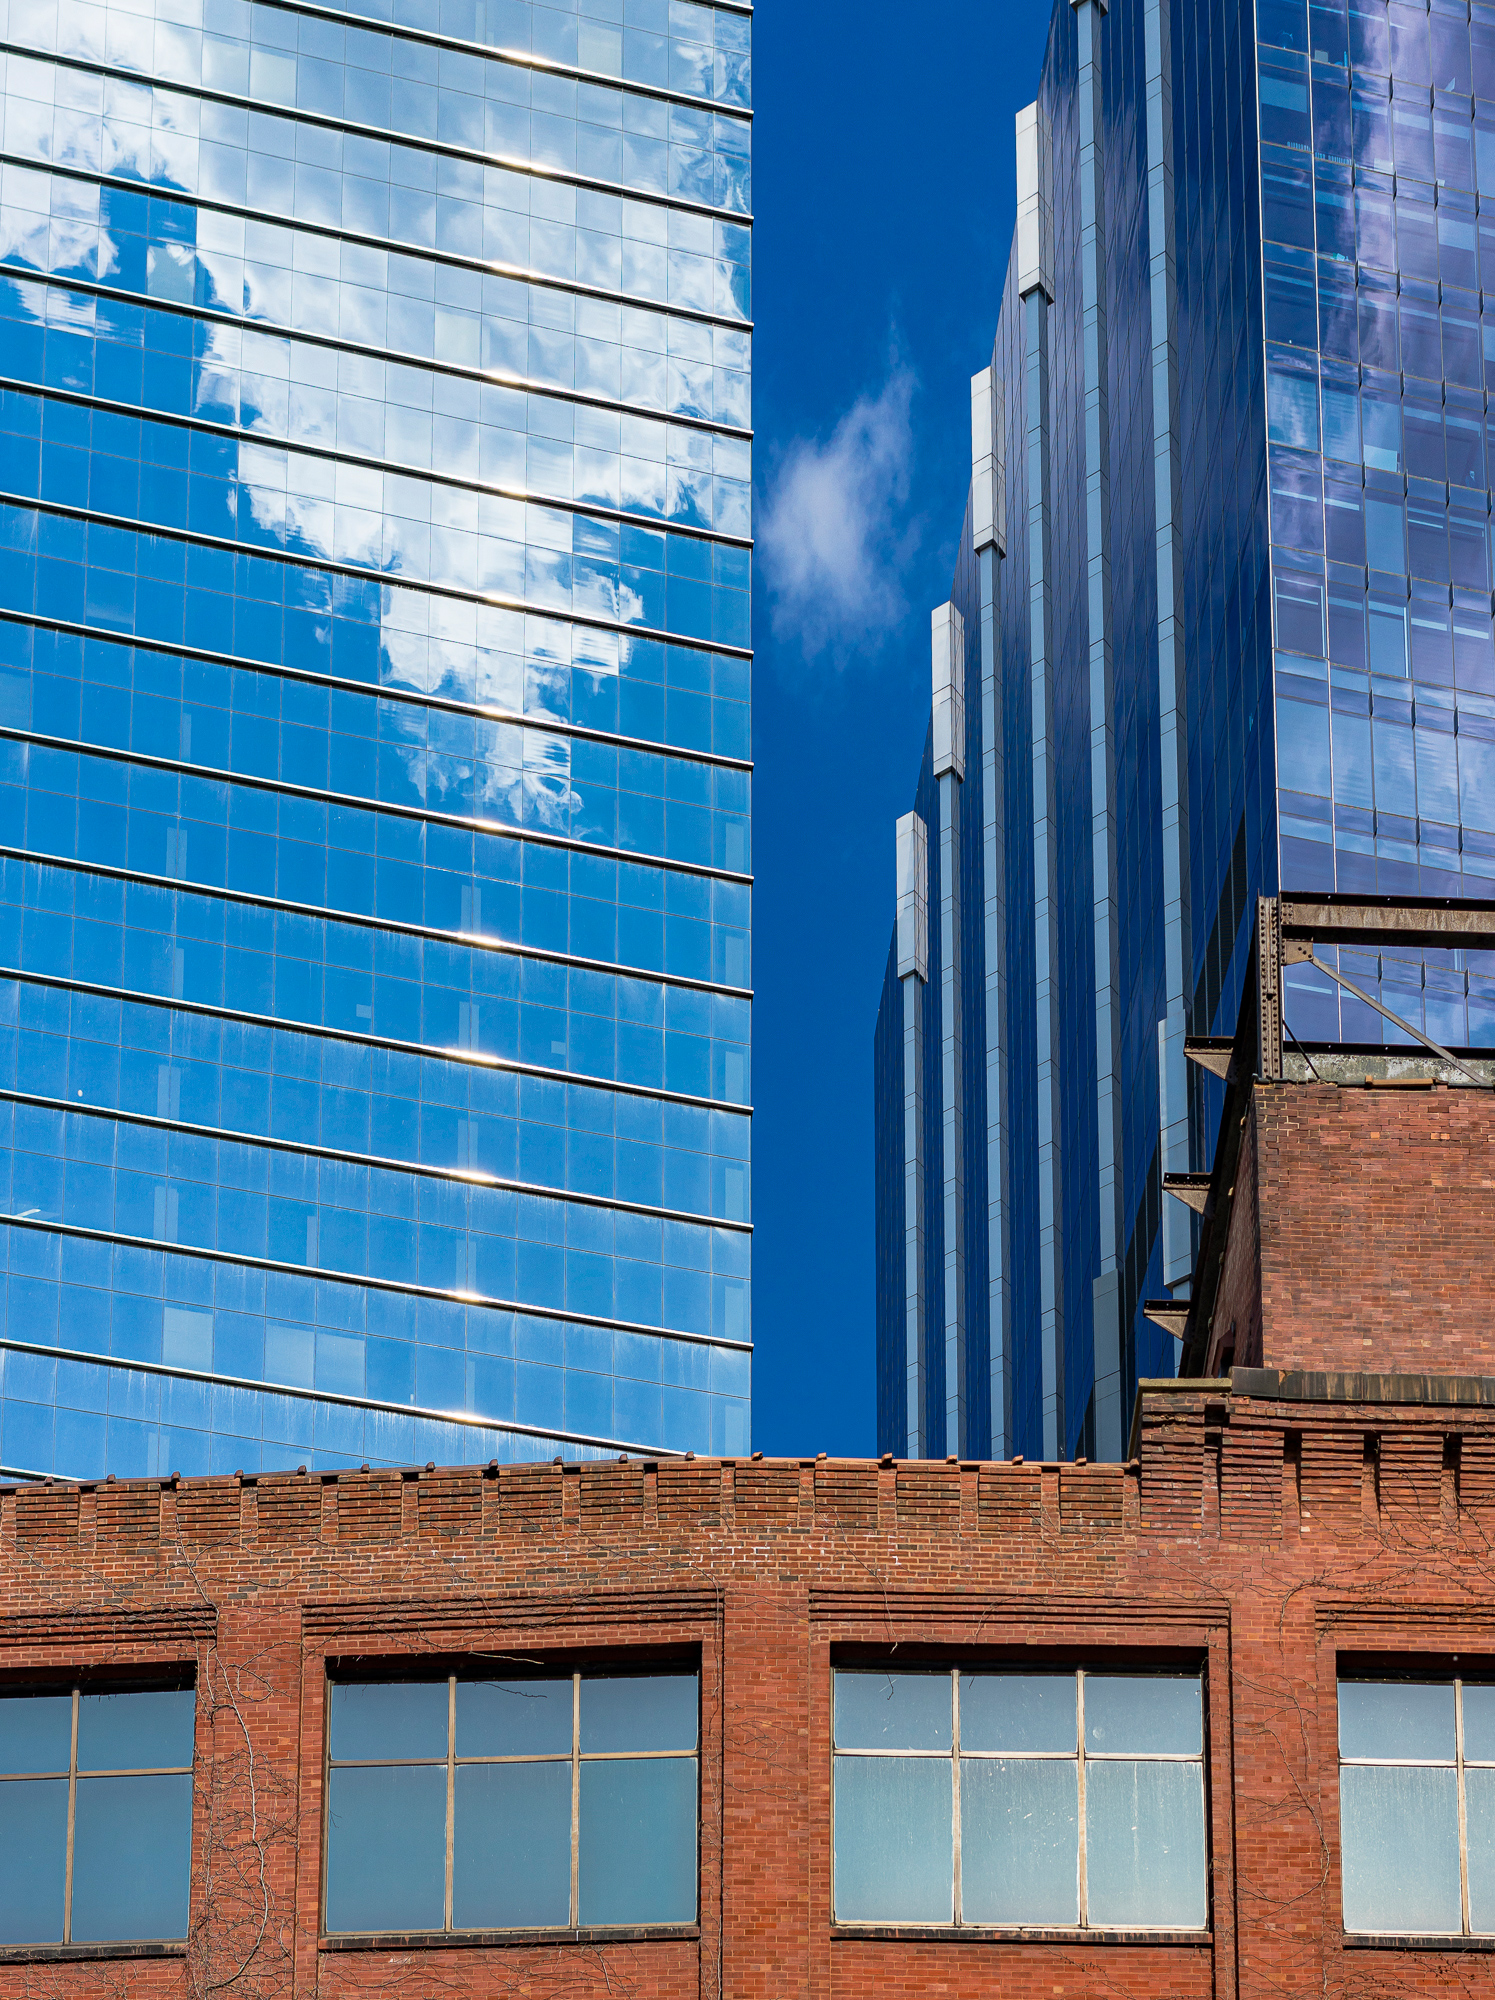 New office buildings contrast with old brick warehouses